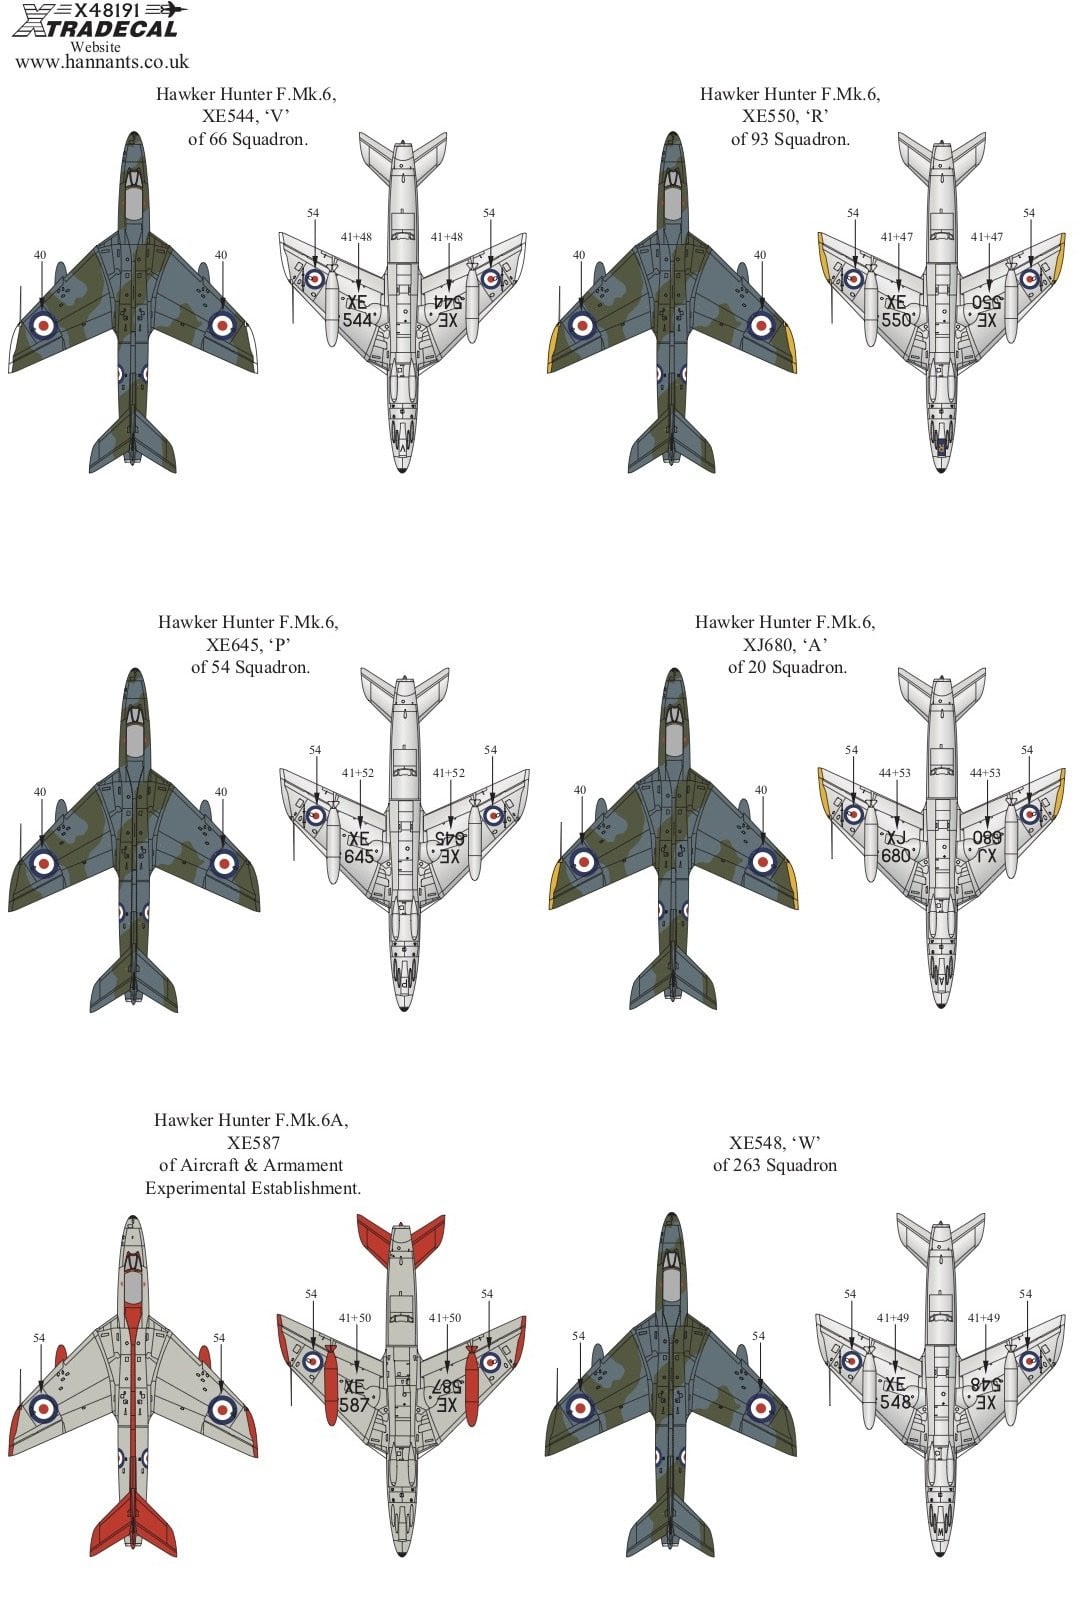 Xtradecal X48191 1/48 Hawker Hunter Mk.6 Pt 2 Model Decals - SGS Model Store